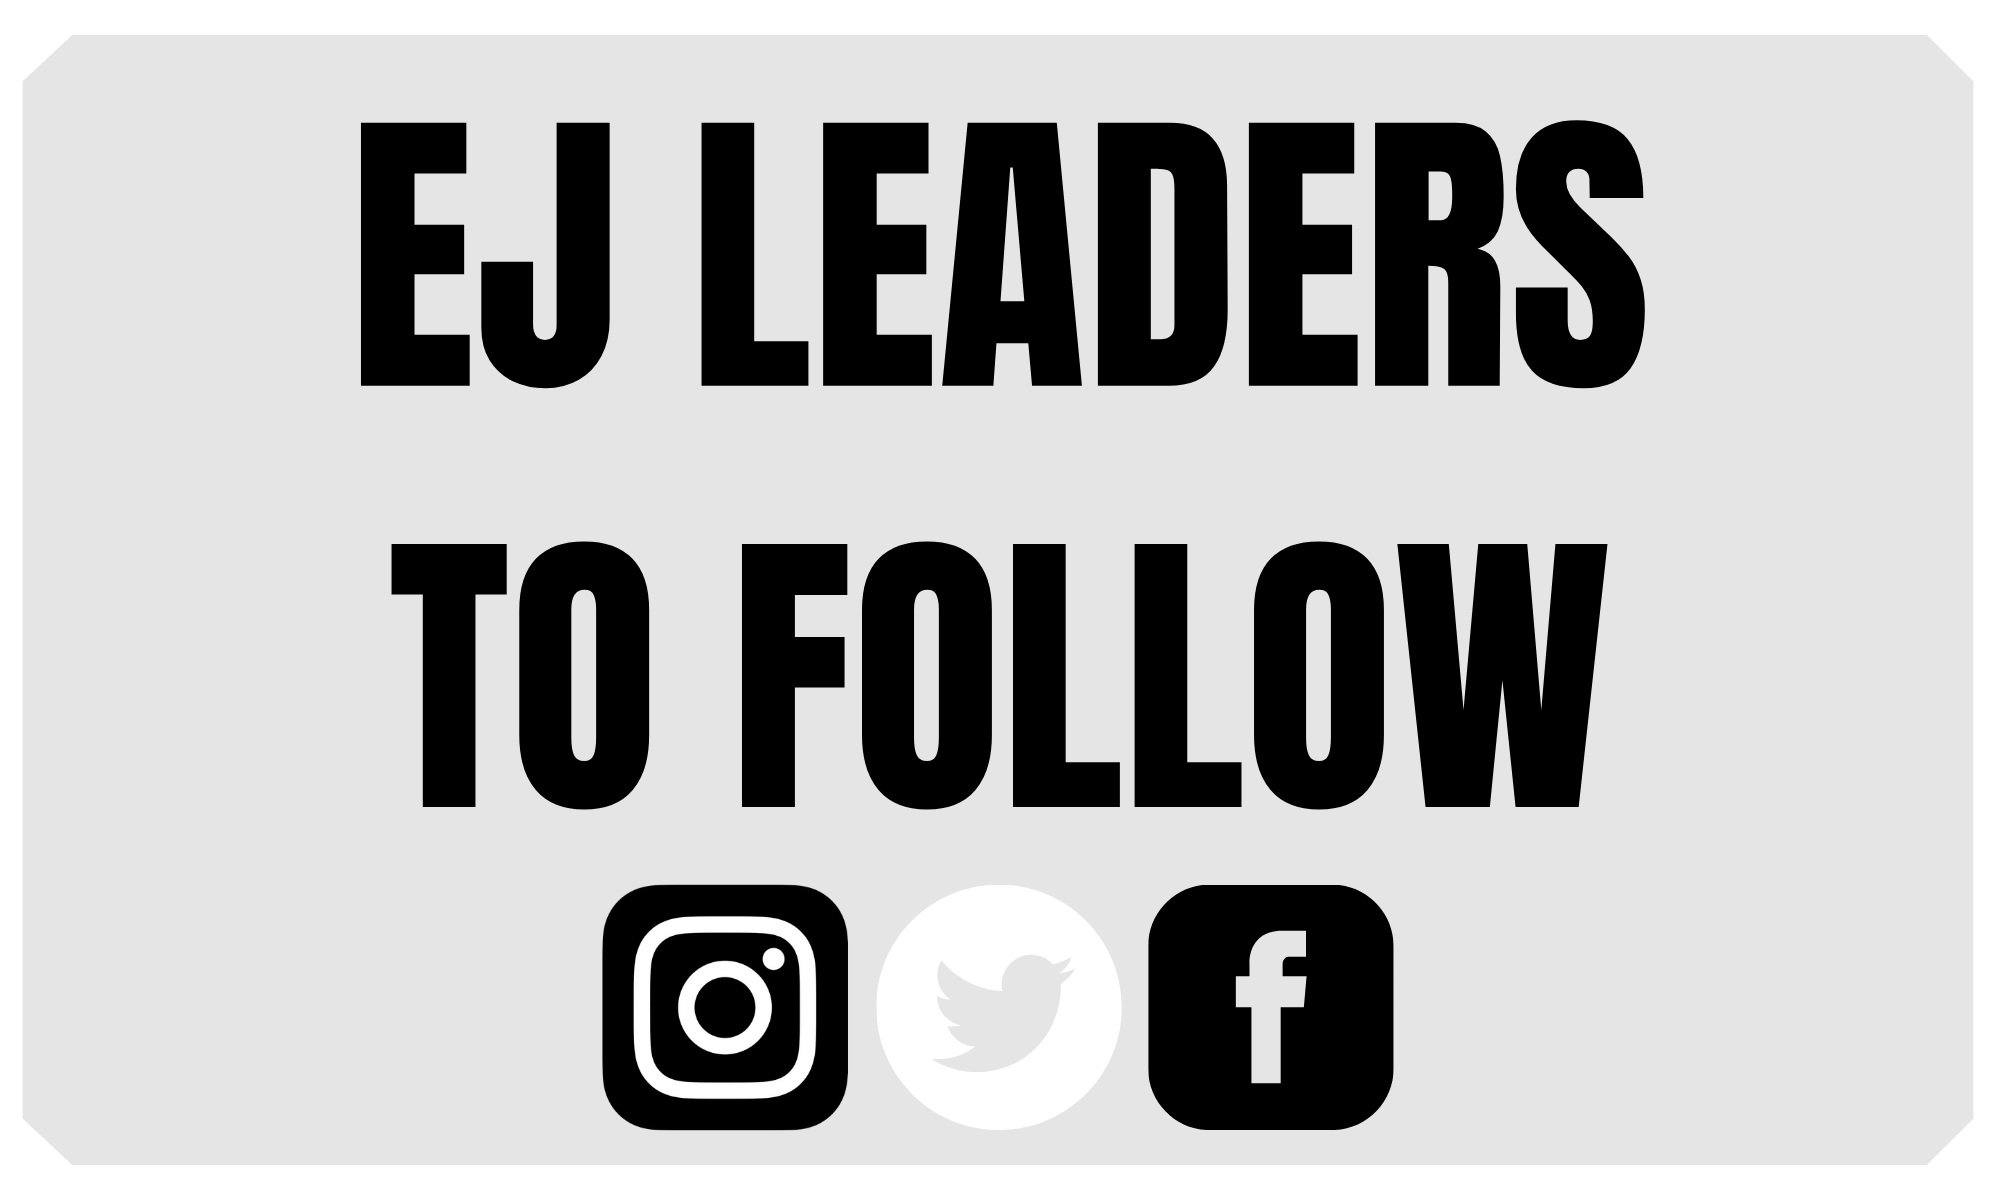 EJ Leaders to follow with social media icons for instagram, twitter and facebook